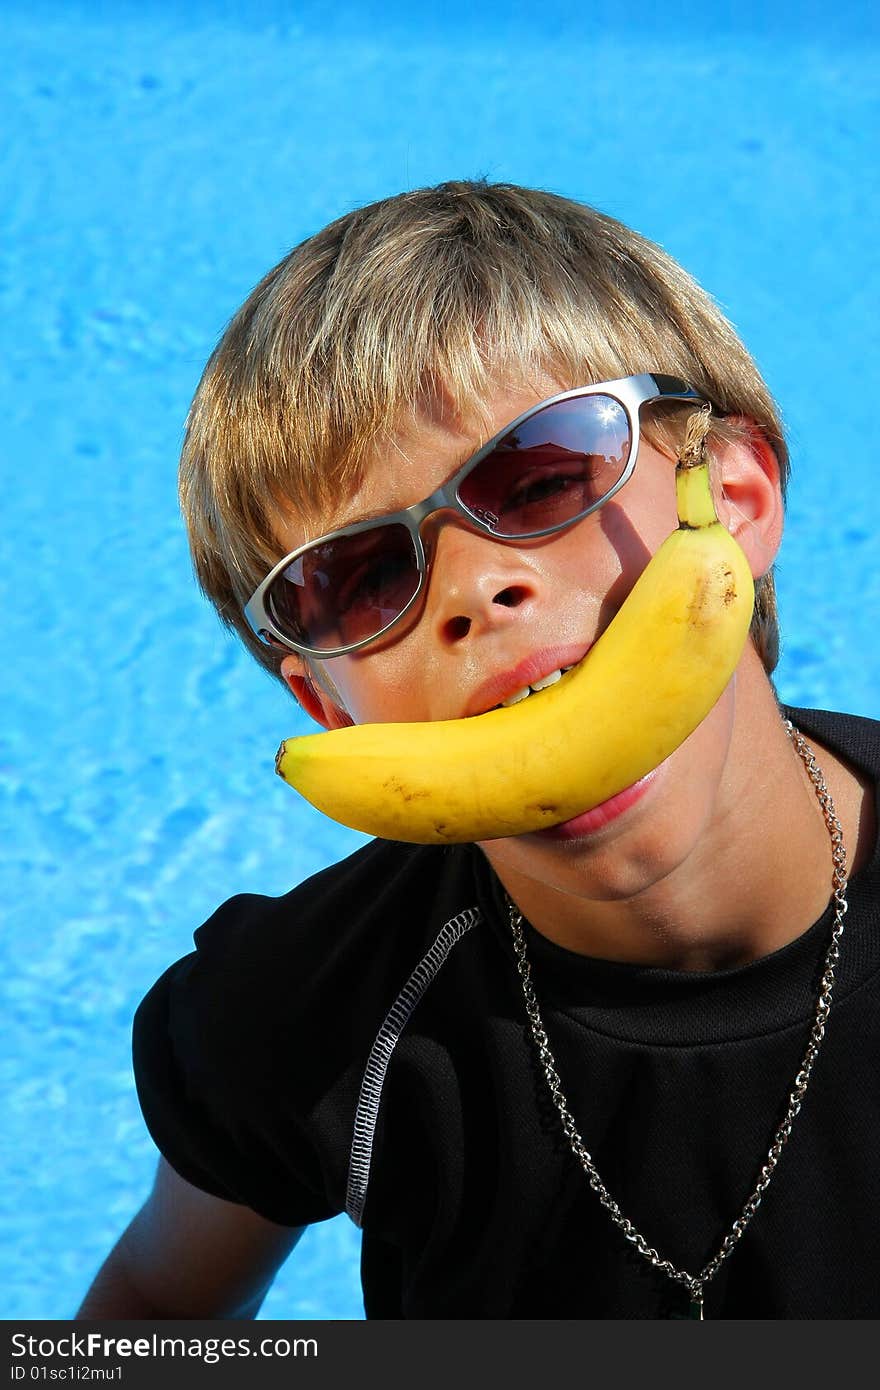 A 10 year old American - German boy with sun glasses sitting at a swimming pool in the summer sun joking with a banana between his teeth. A 10 year old American - German boy with sun glasses sitting at a swimming pool in the summer sun joking with a banana between his teeth